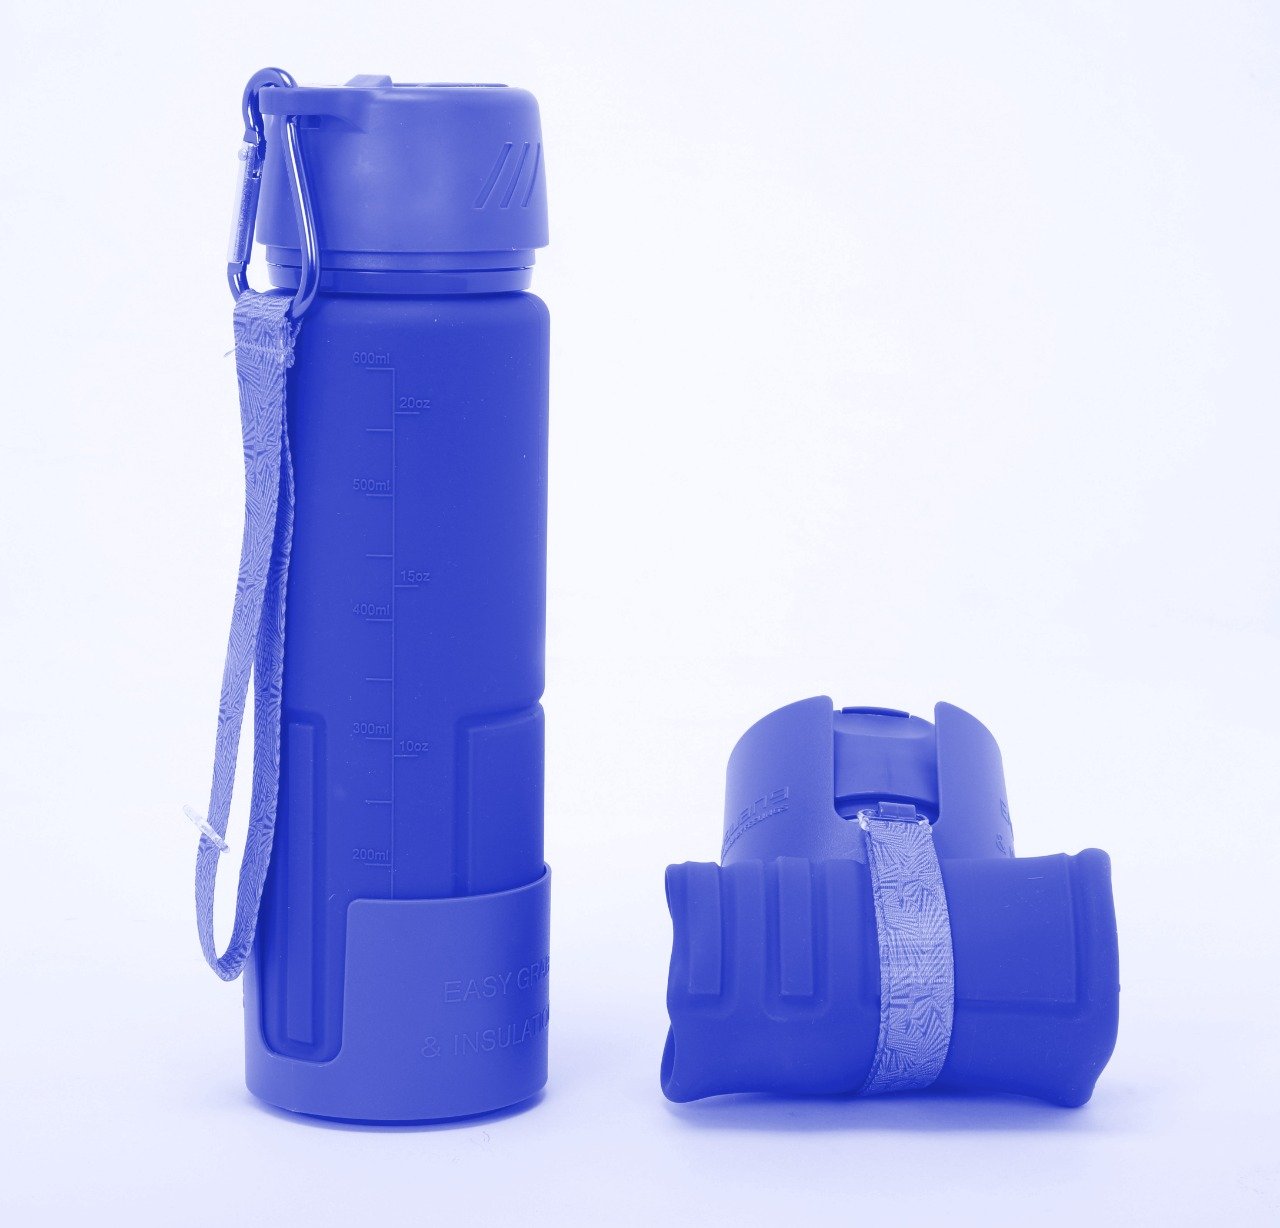 0326 Silicone Collapsible/Foldable Water Bottle - SkyShopy